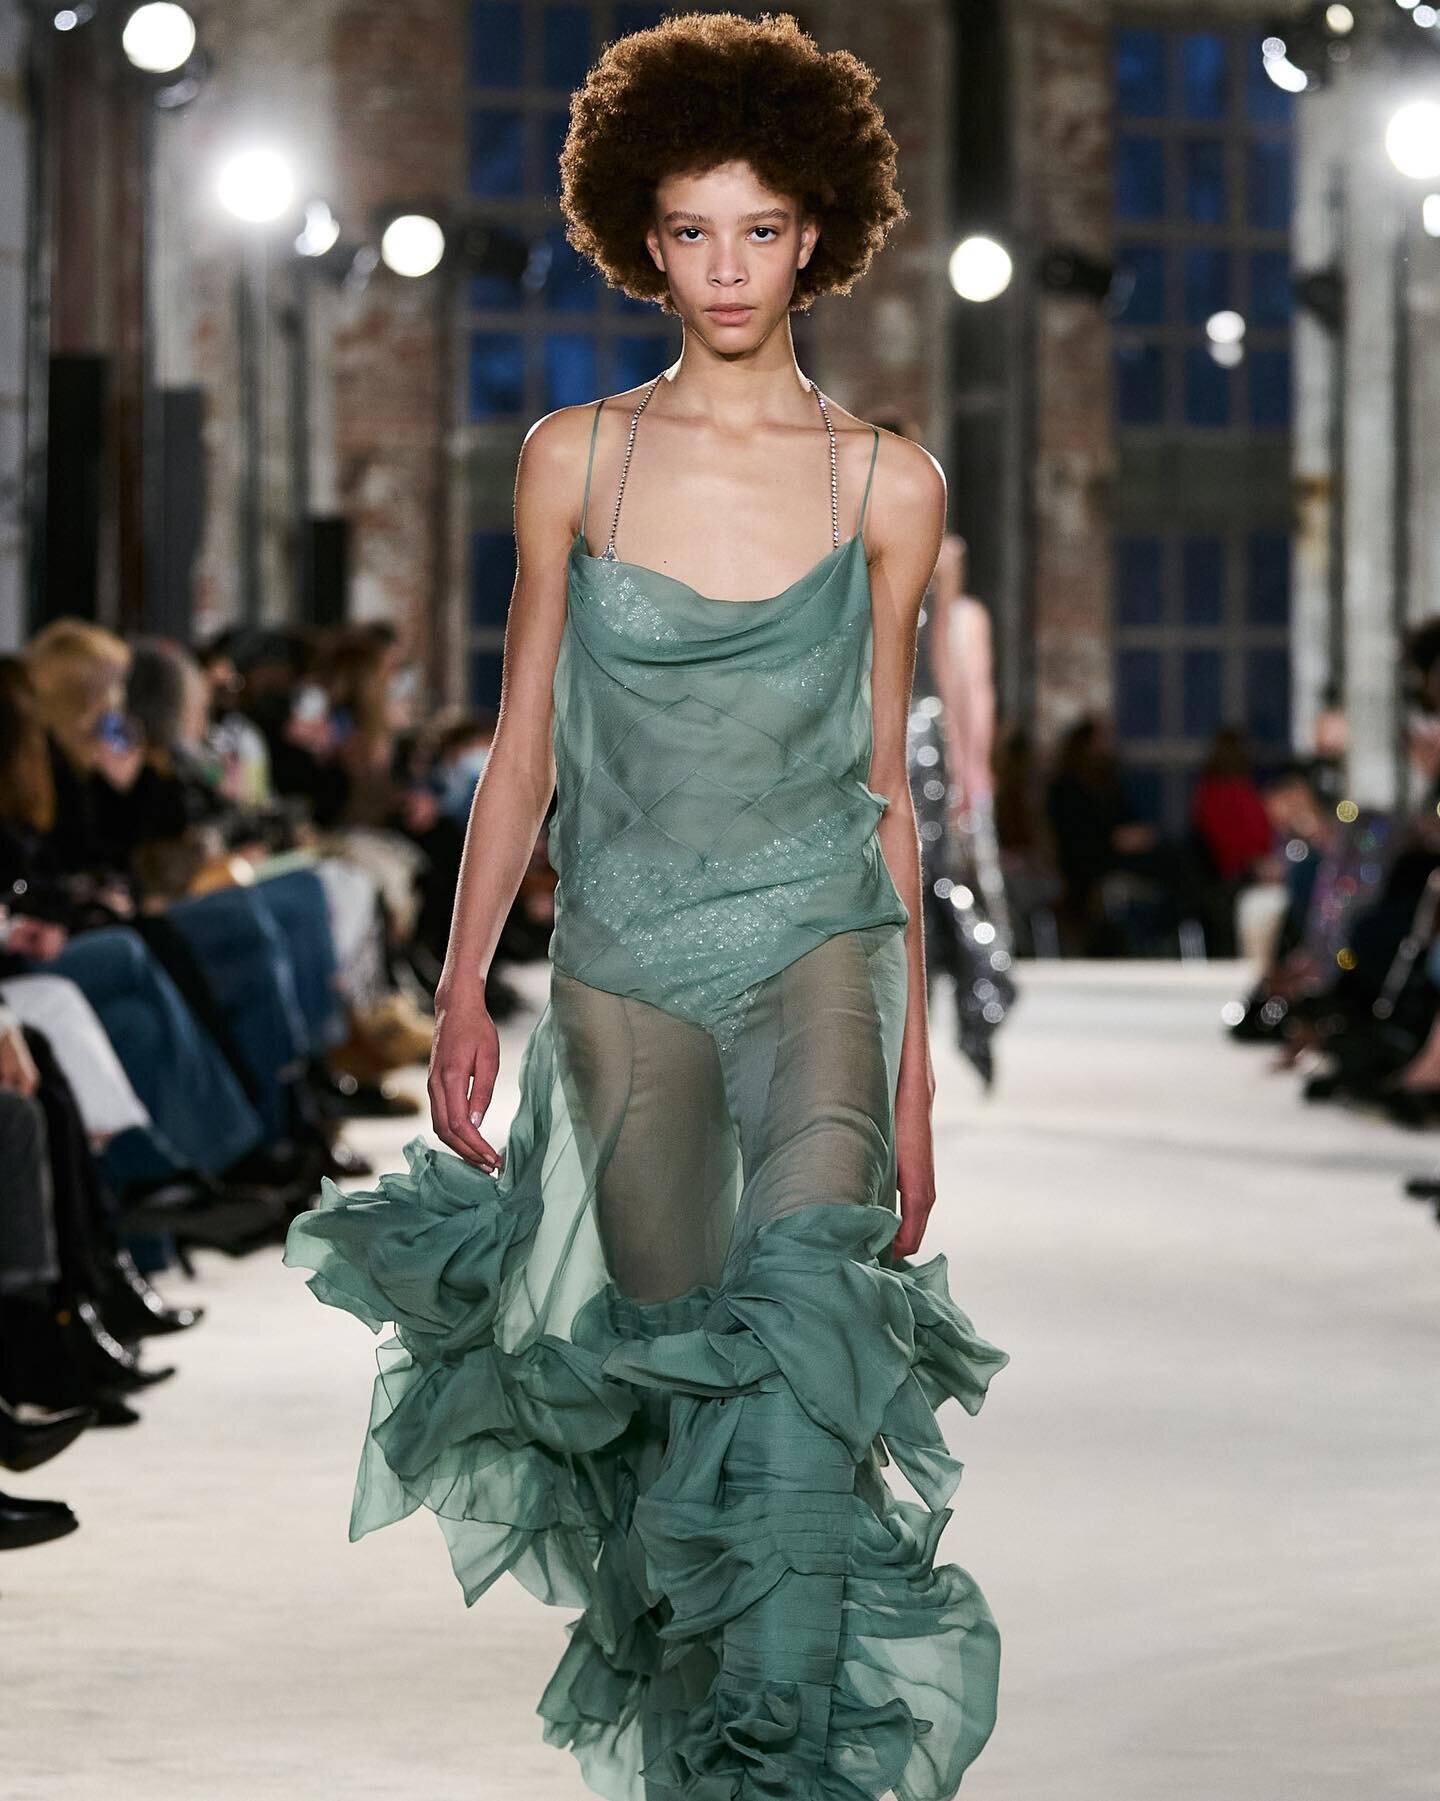 Alexandre Vauthier Spring 2022 Couture

Vauthier&rsquo;s 2022 haute couture collection was captivating as it was inspired by art and fashion of 1920s Paris and Berlin. These designs represent energetic feelings of renewal through playful shapes and t